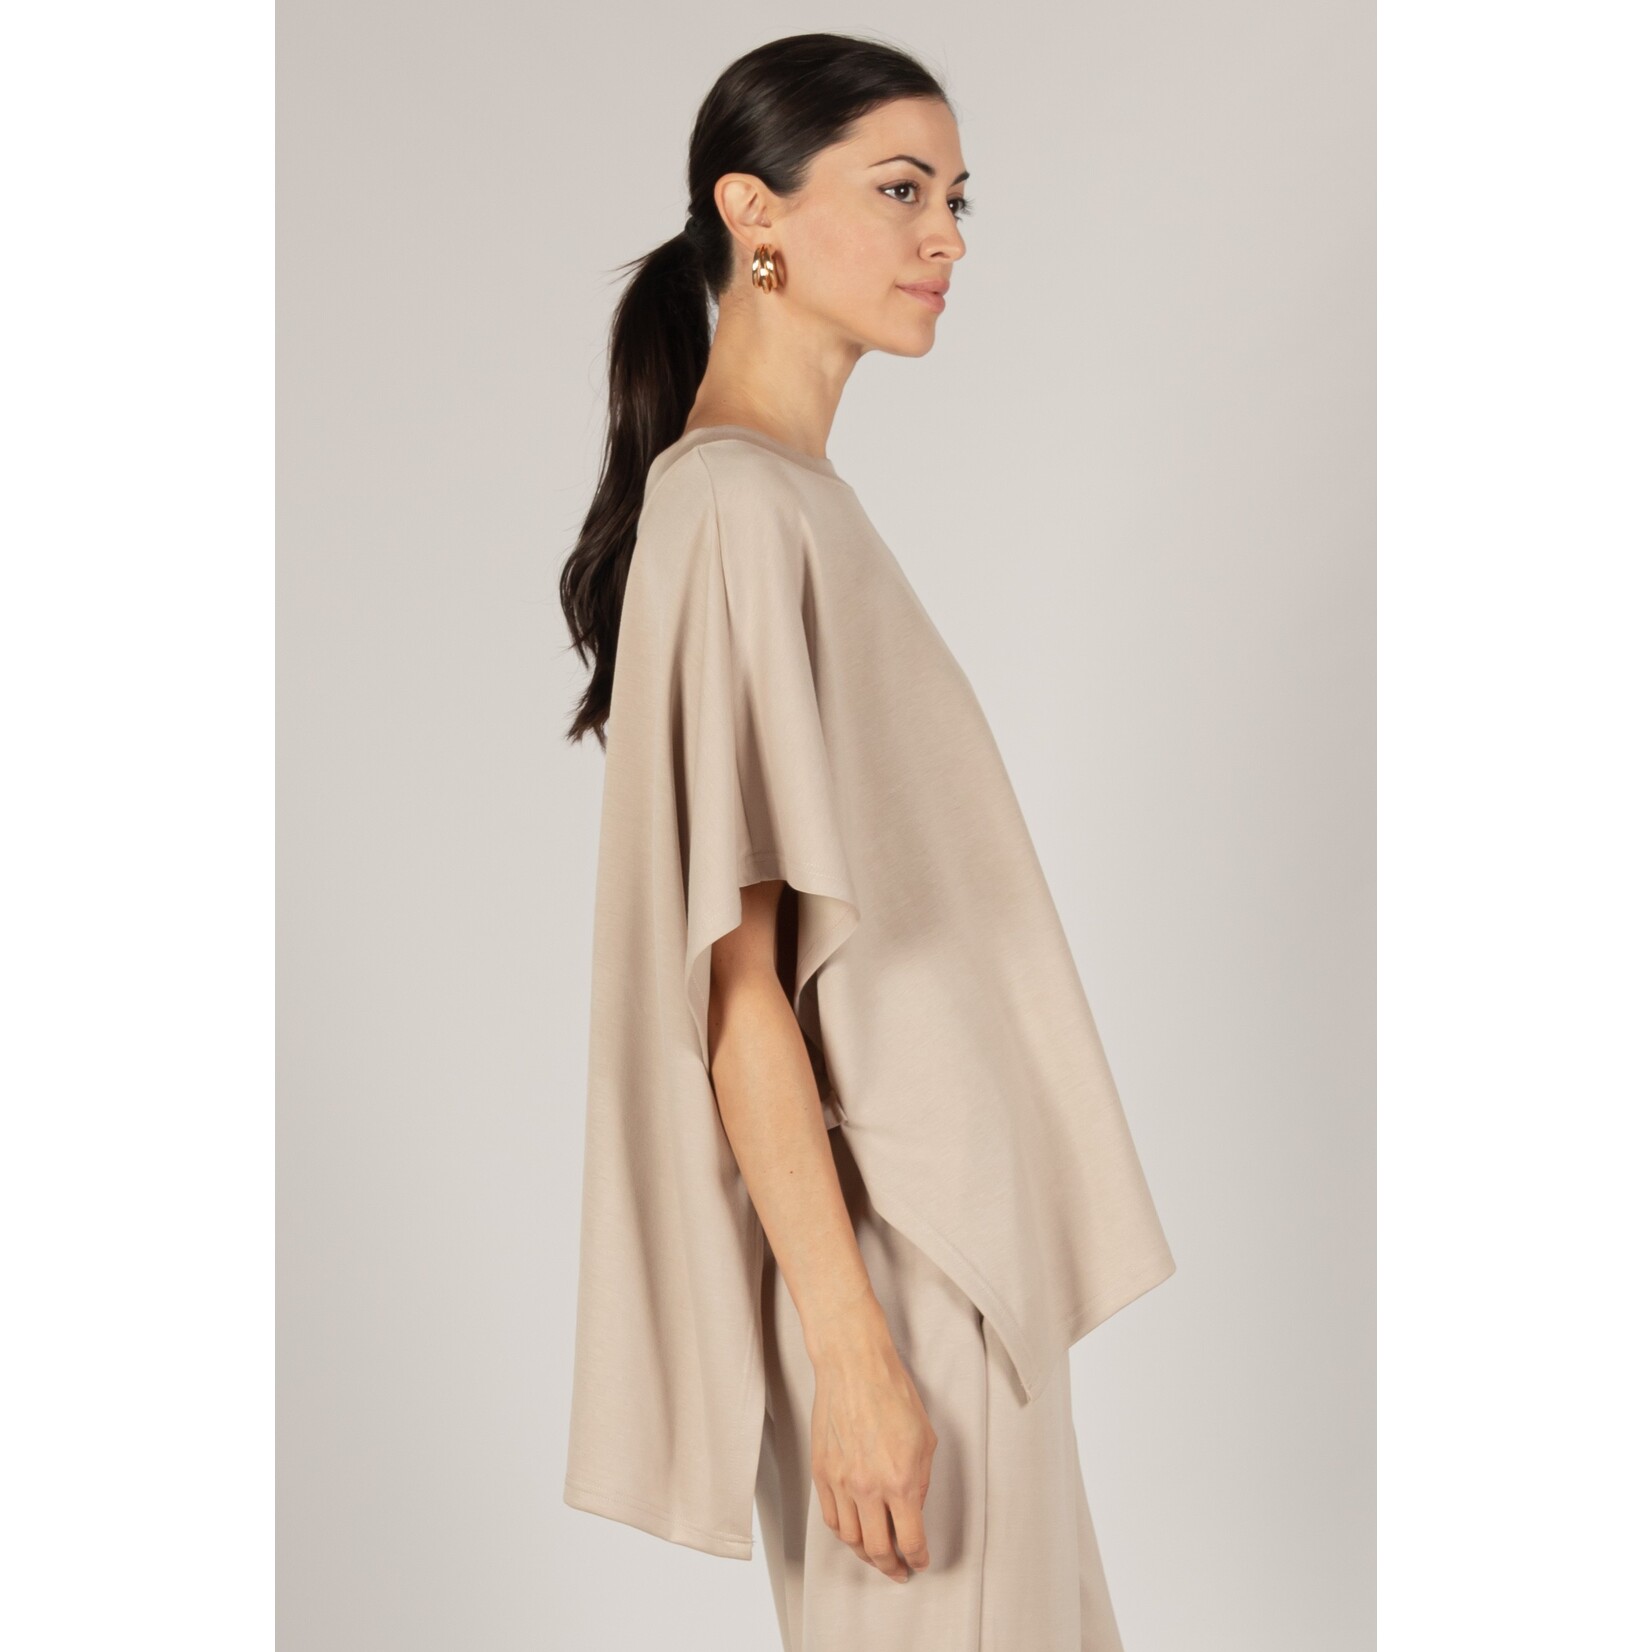 Hillary Taupe Cape Top